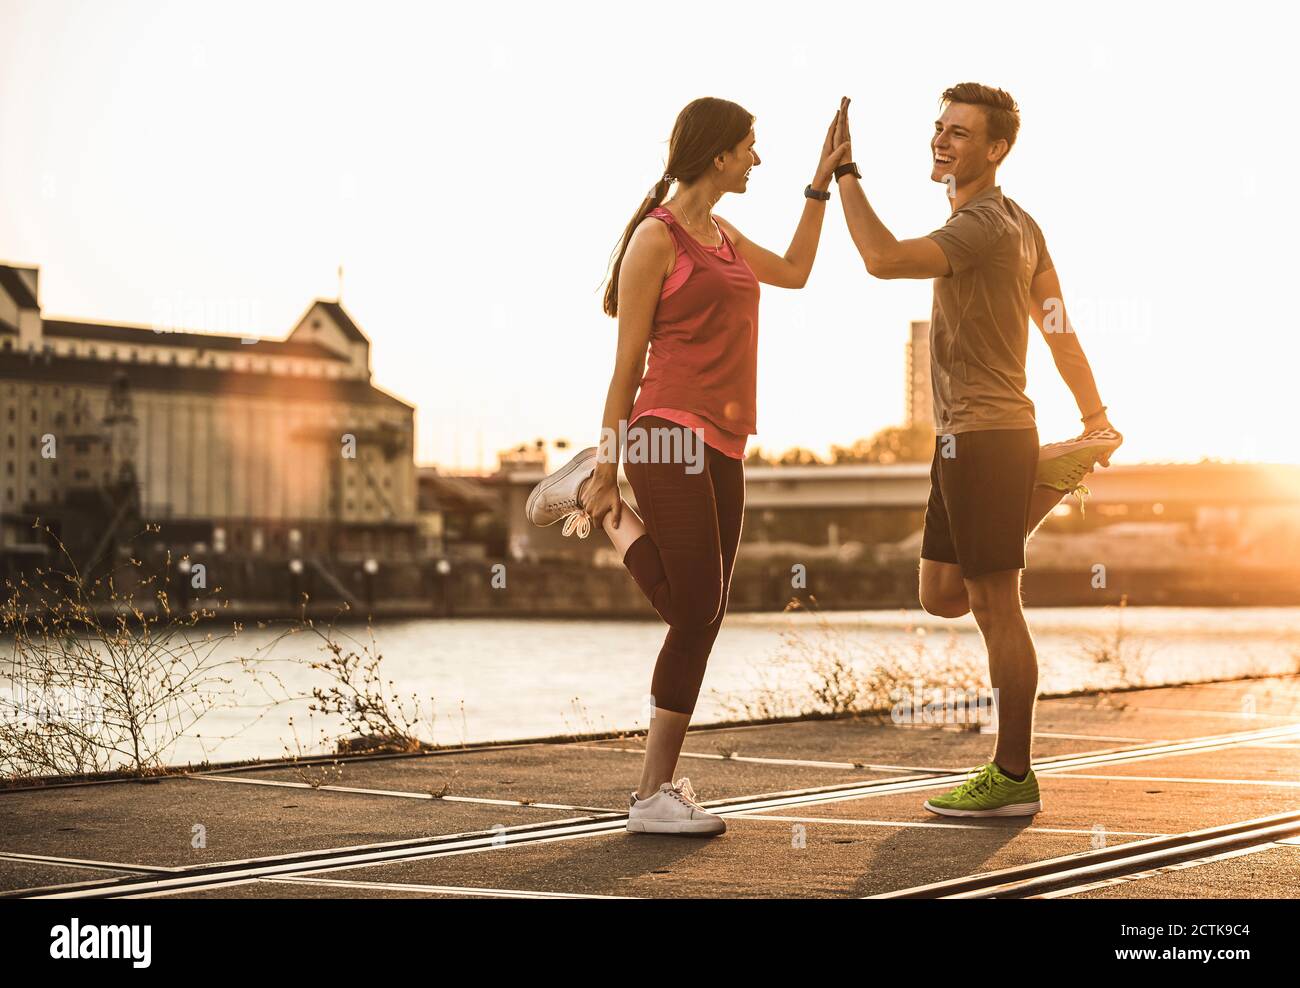 Friends exercising with hands clasped at harbor Stock Photo